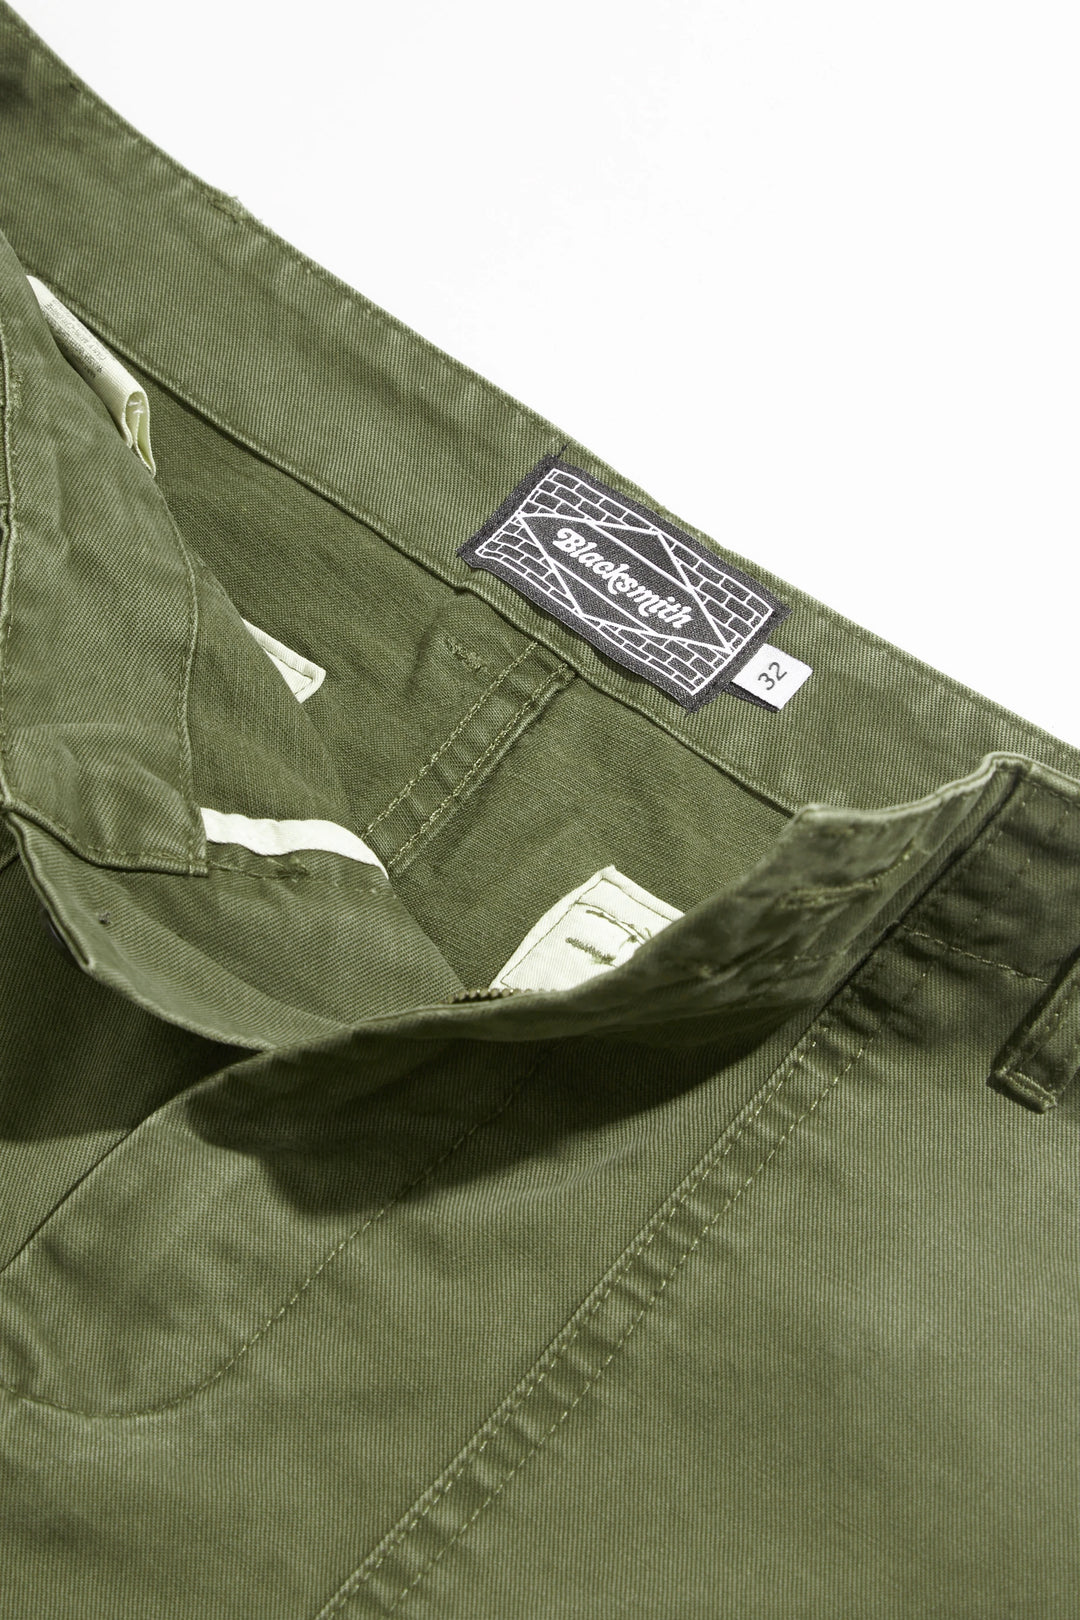 Blacksmith - Sowing Field Pants - Olive – Blacksmith Store